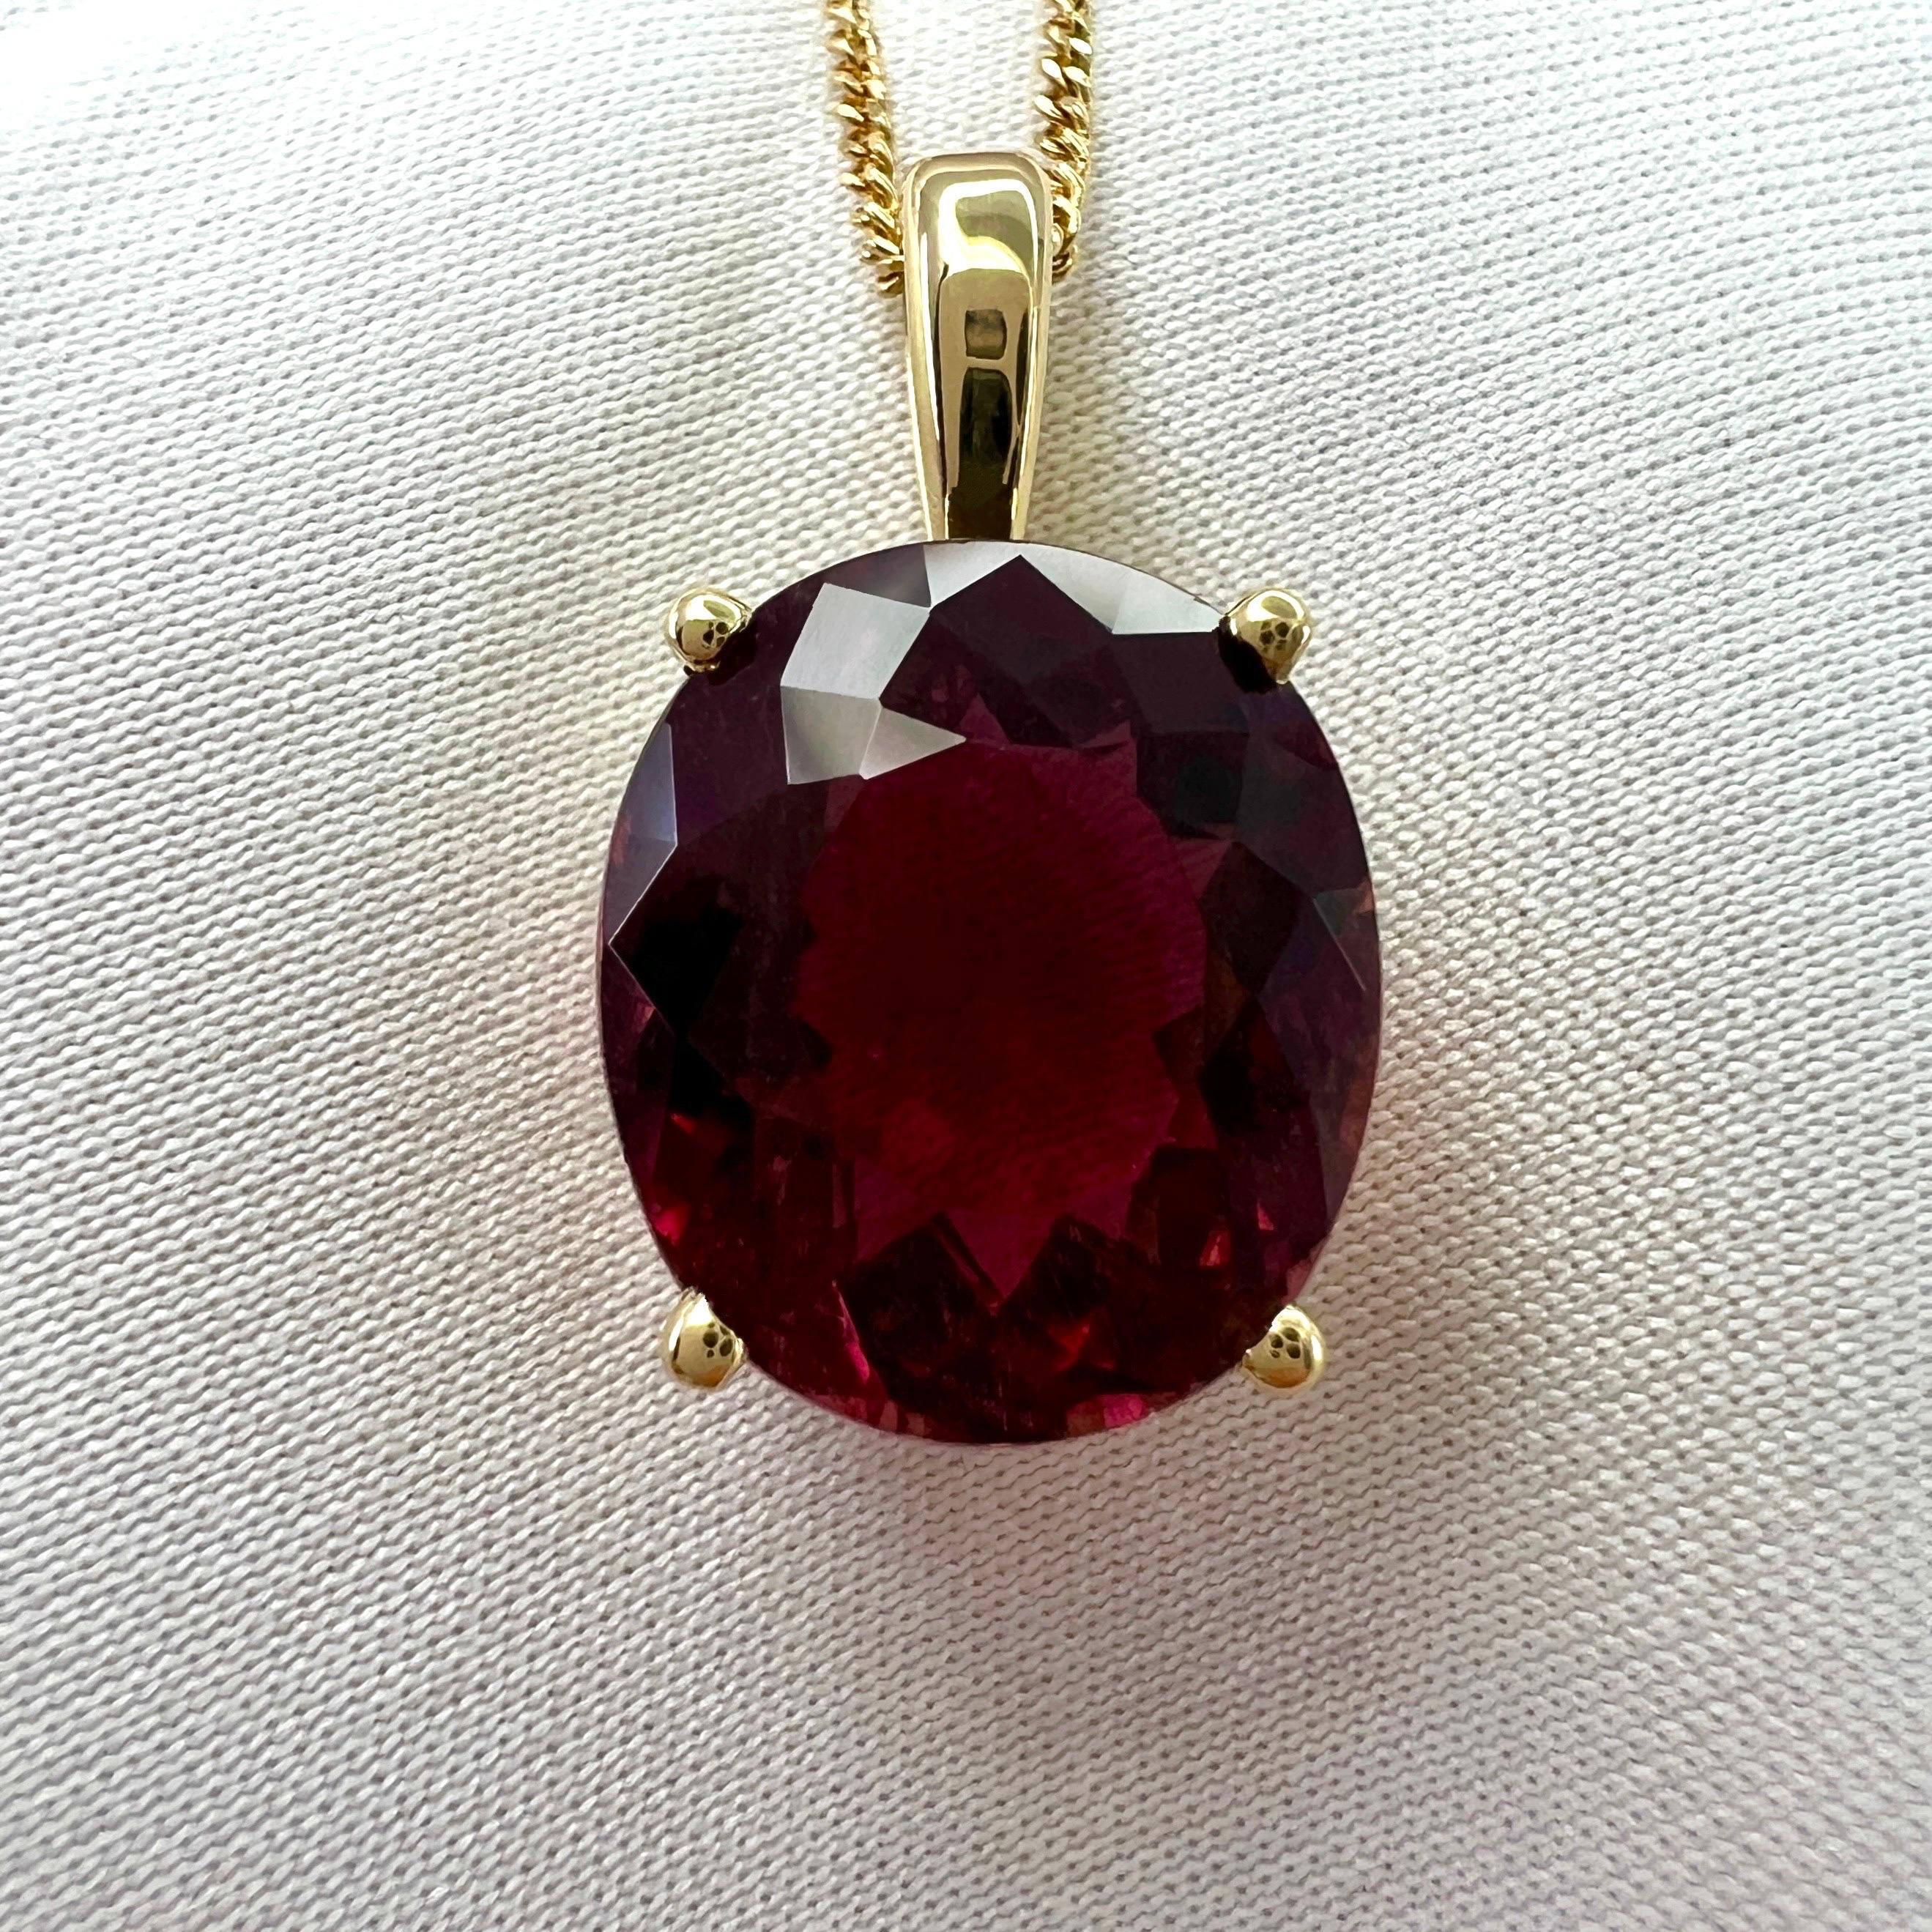 Fancy Oval Cut Pink Orange Rubellite Tourmaline 18k Yellow Gold Pendant Necklace. 

6.87 Carat rubellite tourmaline with a beautiful deep pink orange colour, very good clarity and an excellent fancy oval cut.
Set in a fine 18k yellow gold solitaire